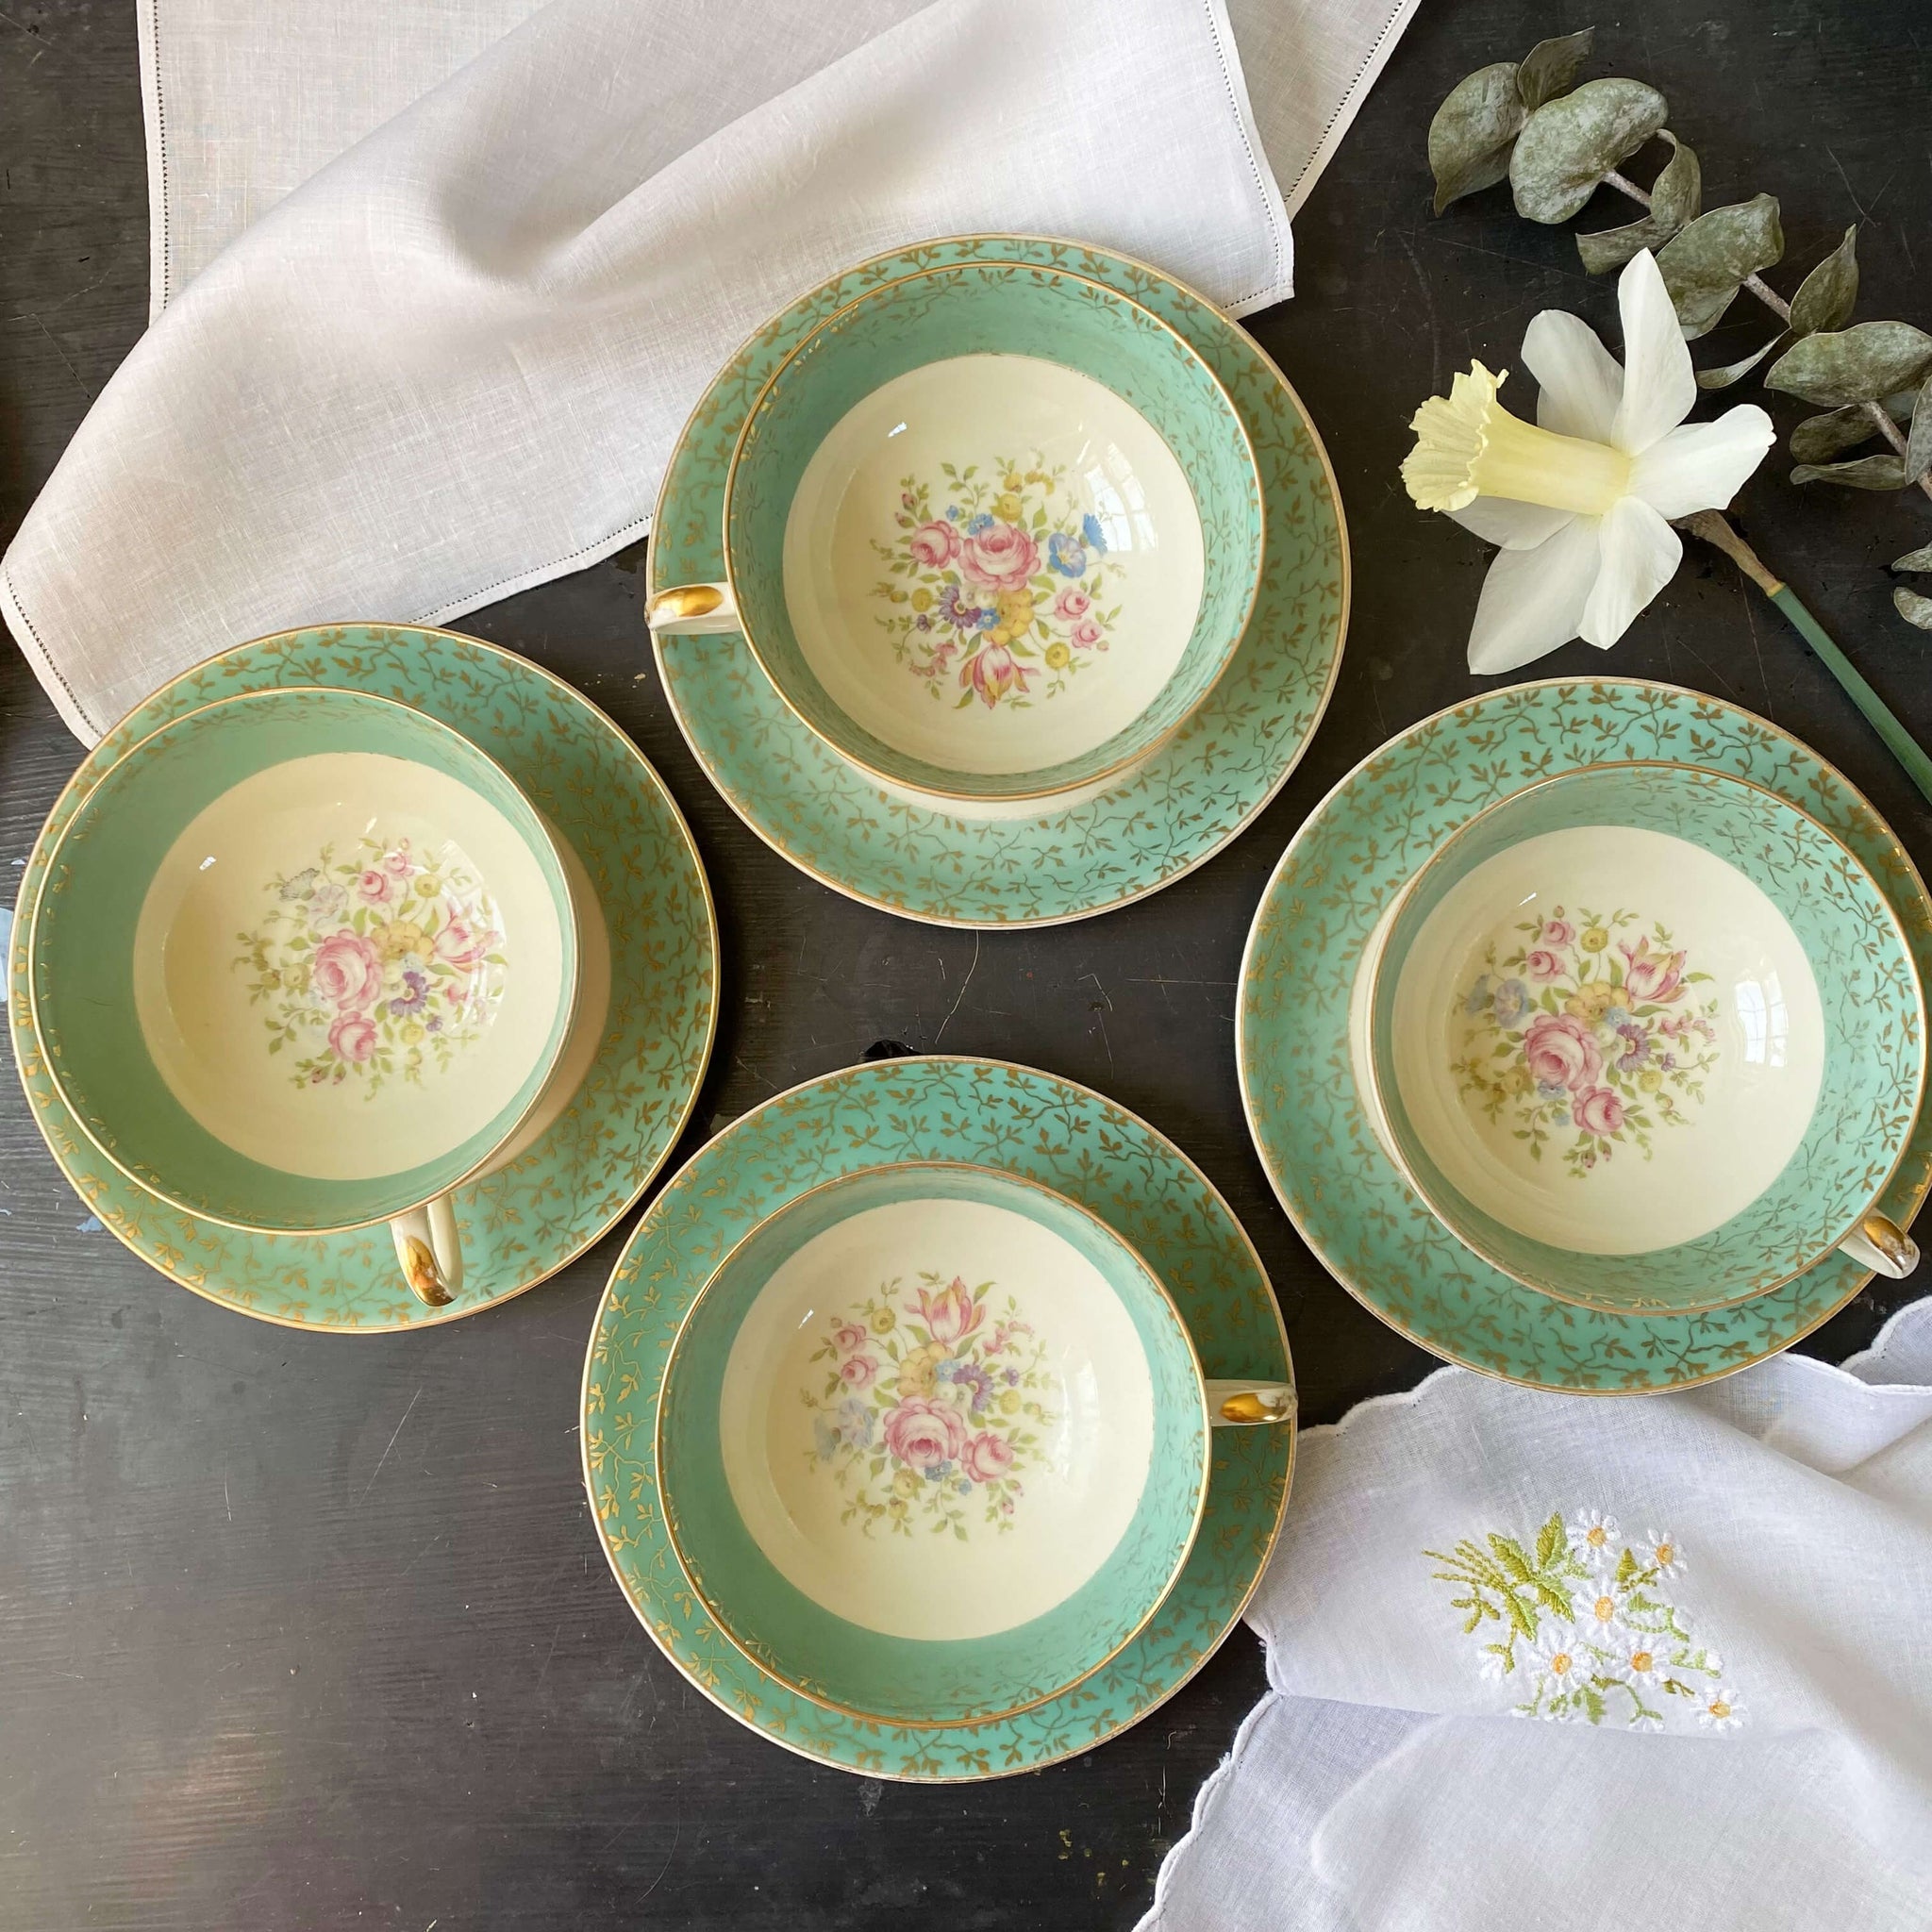 Vintage Thomas Ivory Porcelain Cups & Saucers with Green Bands circa 1939-1952 - Set of Four